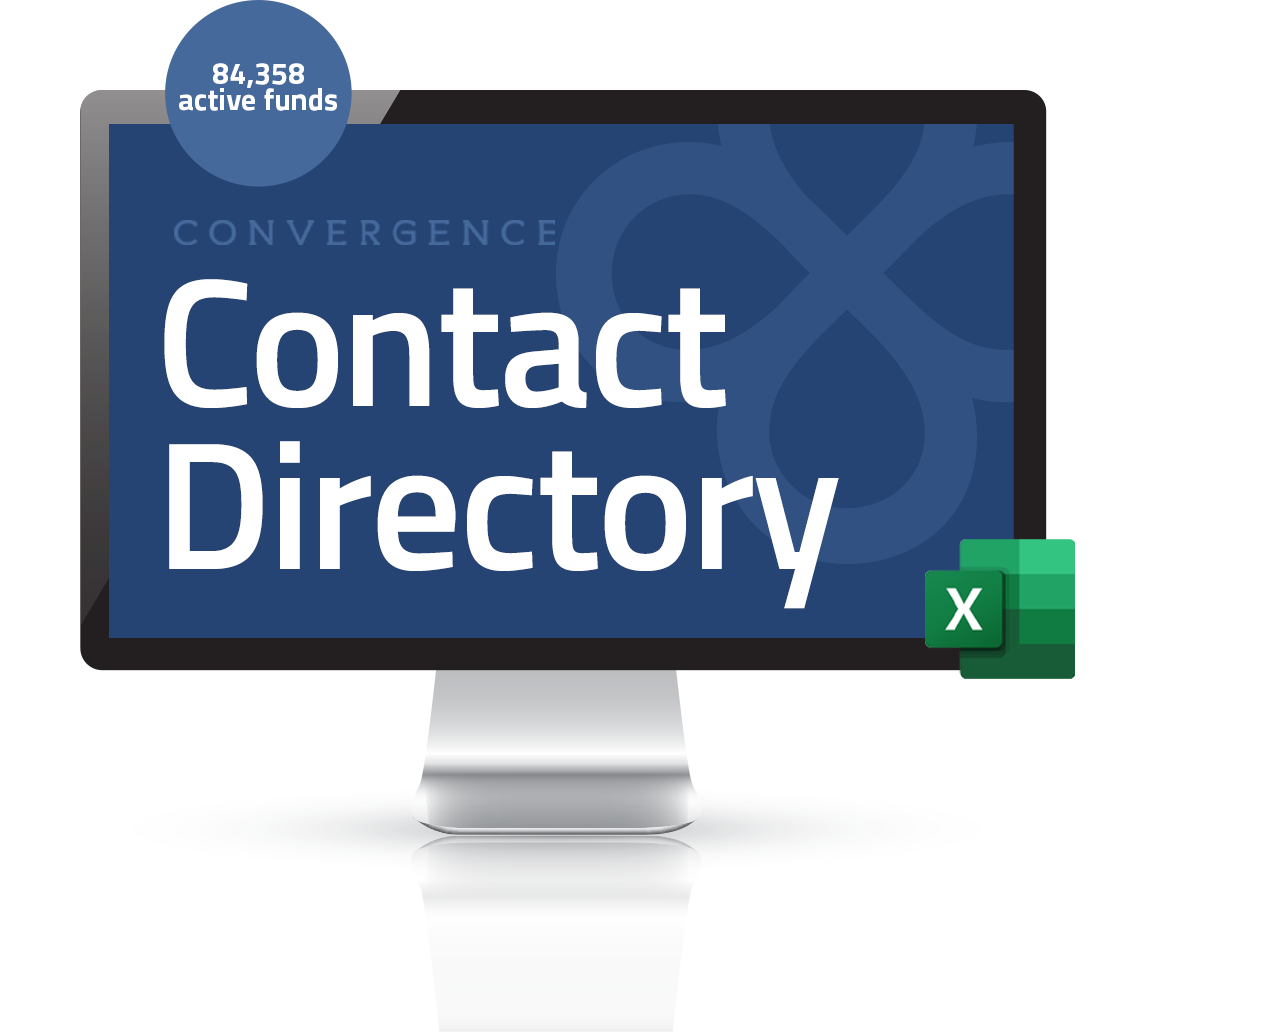 CONTACT DIRECTORY